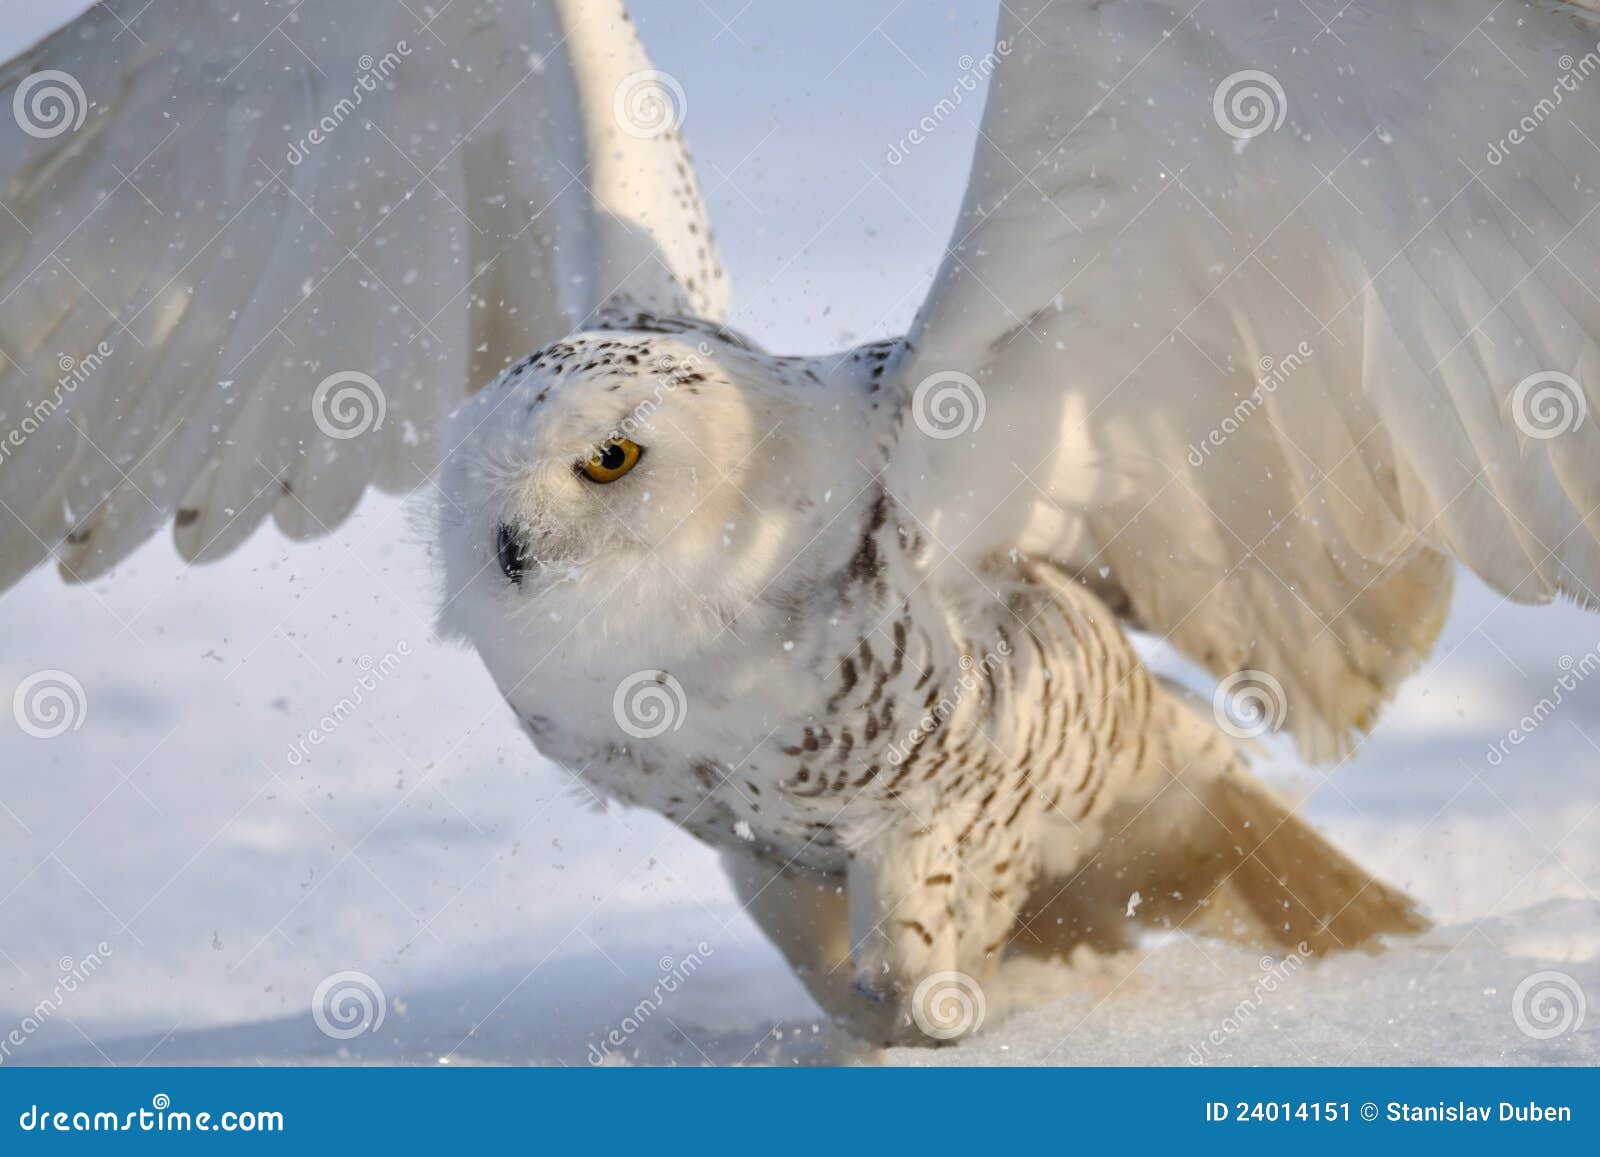 Snowy owl flap wings stock image. Image of sitting, february - 24014151